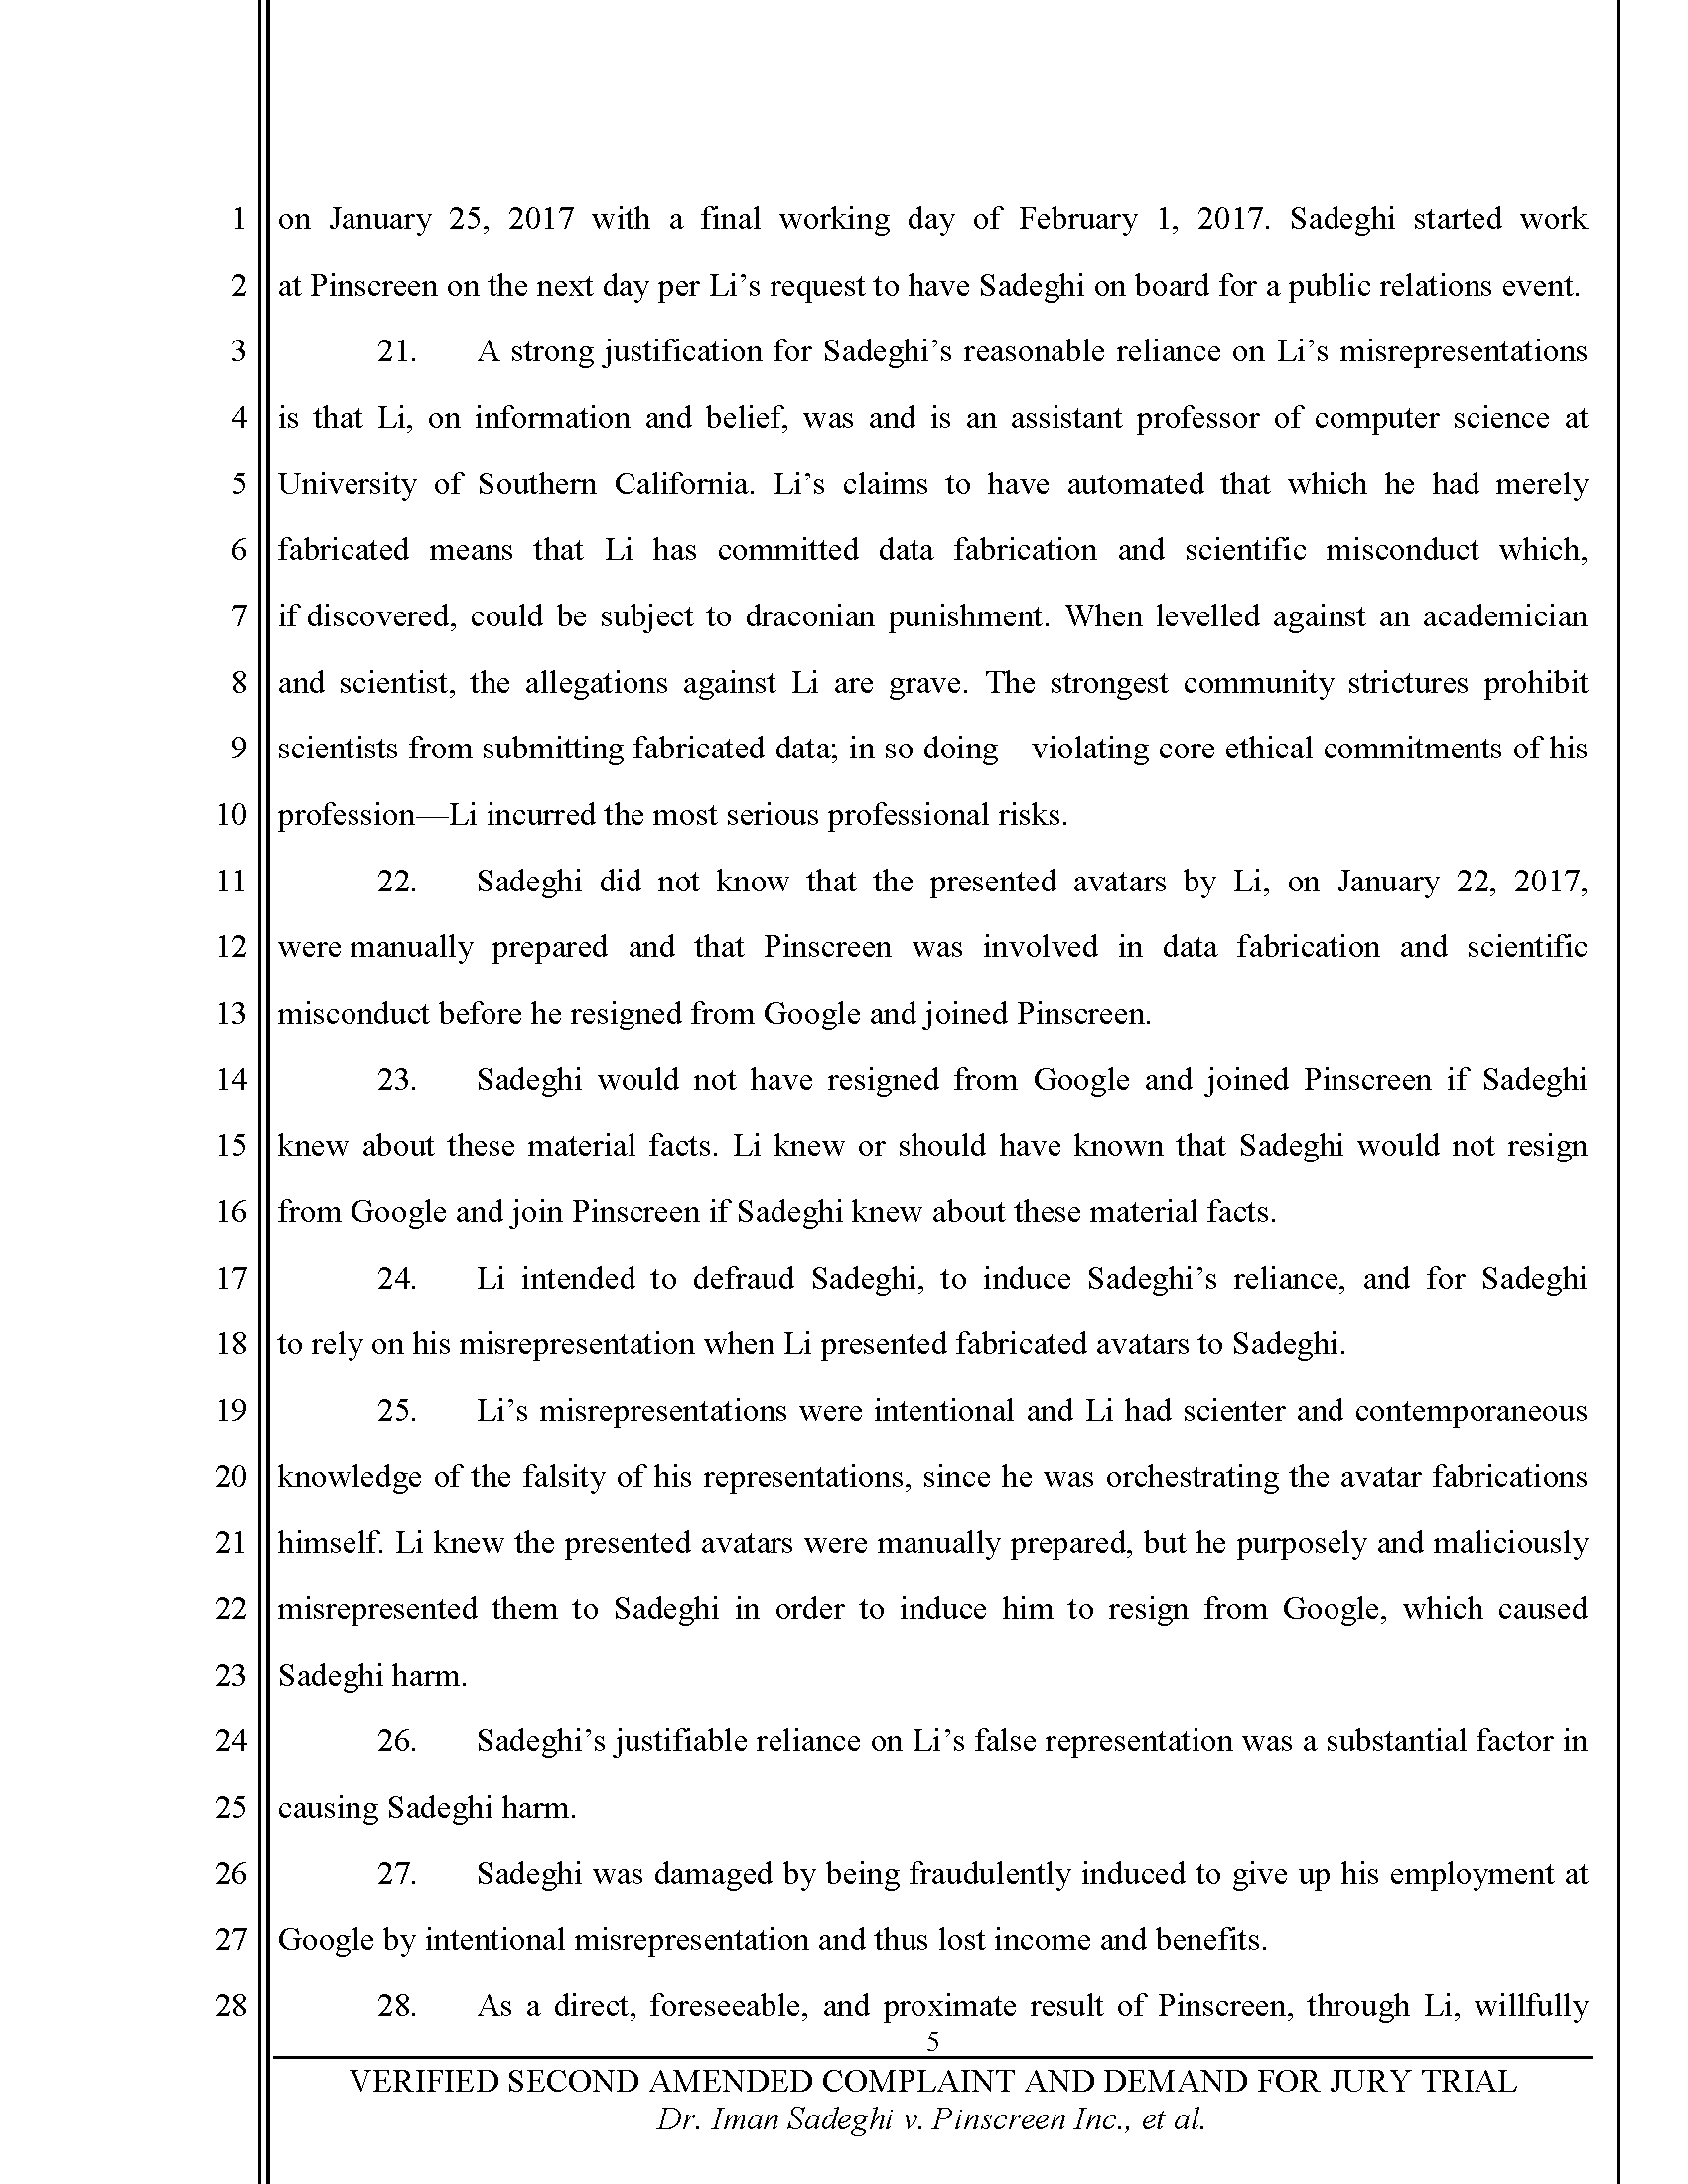 Second Amended Complaint (SAC) Page 6